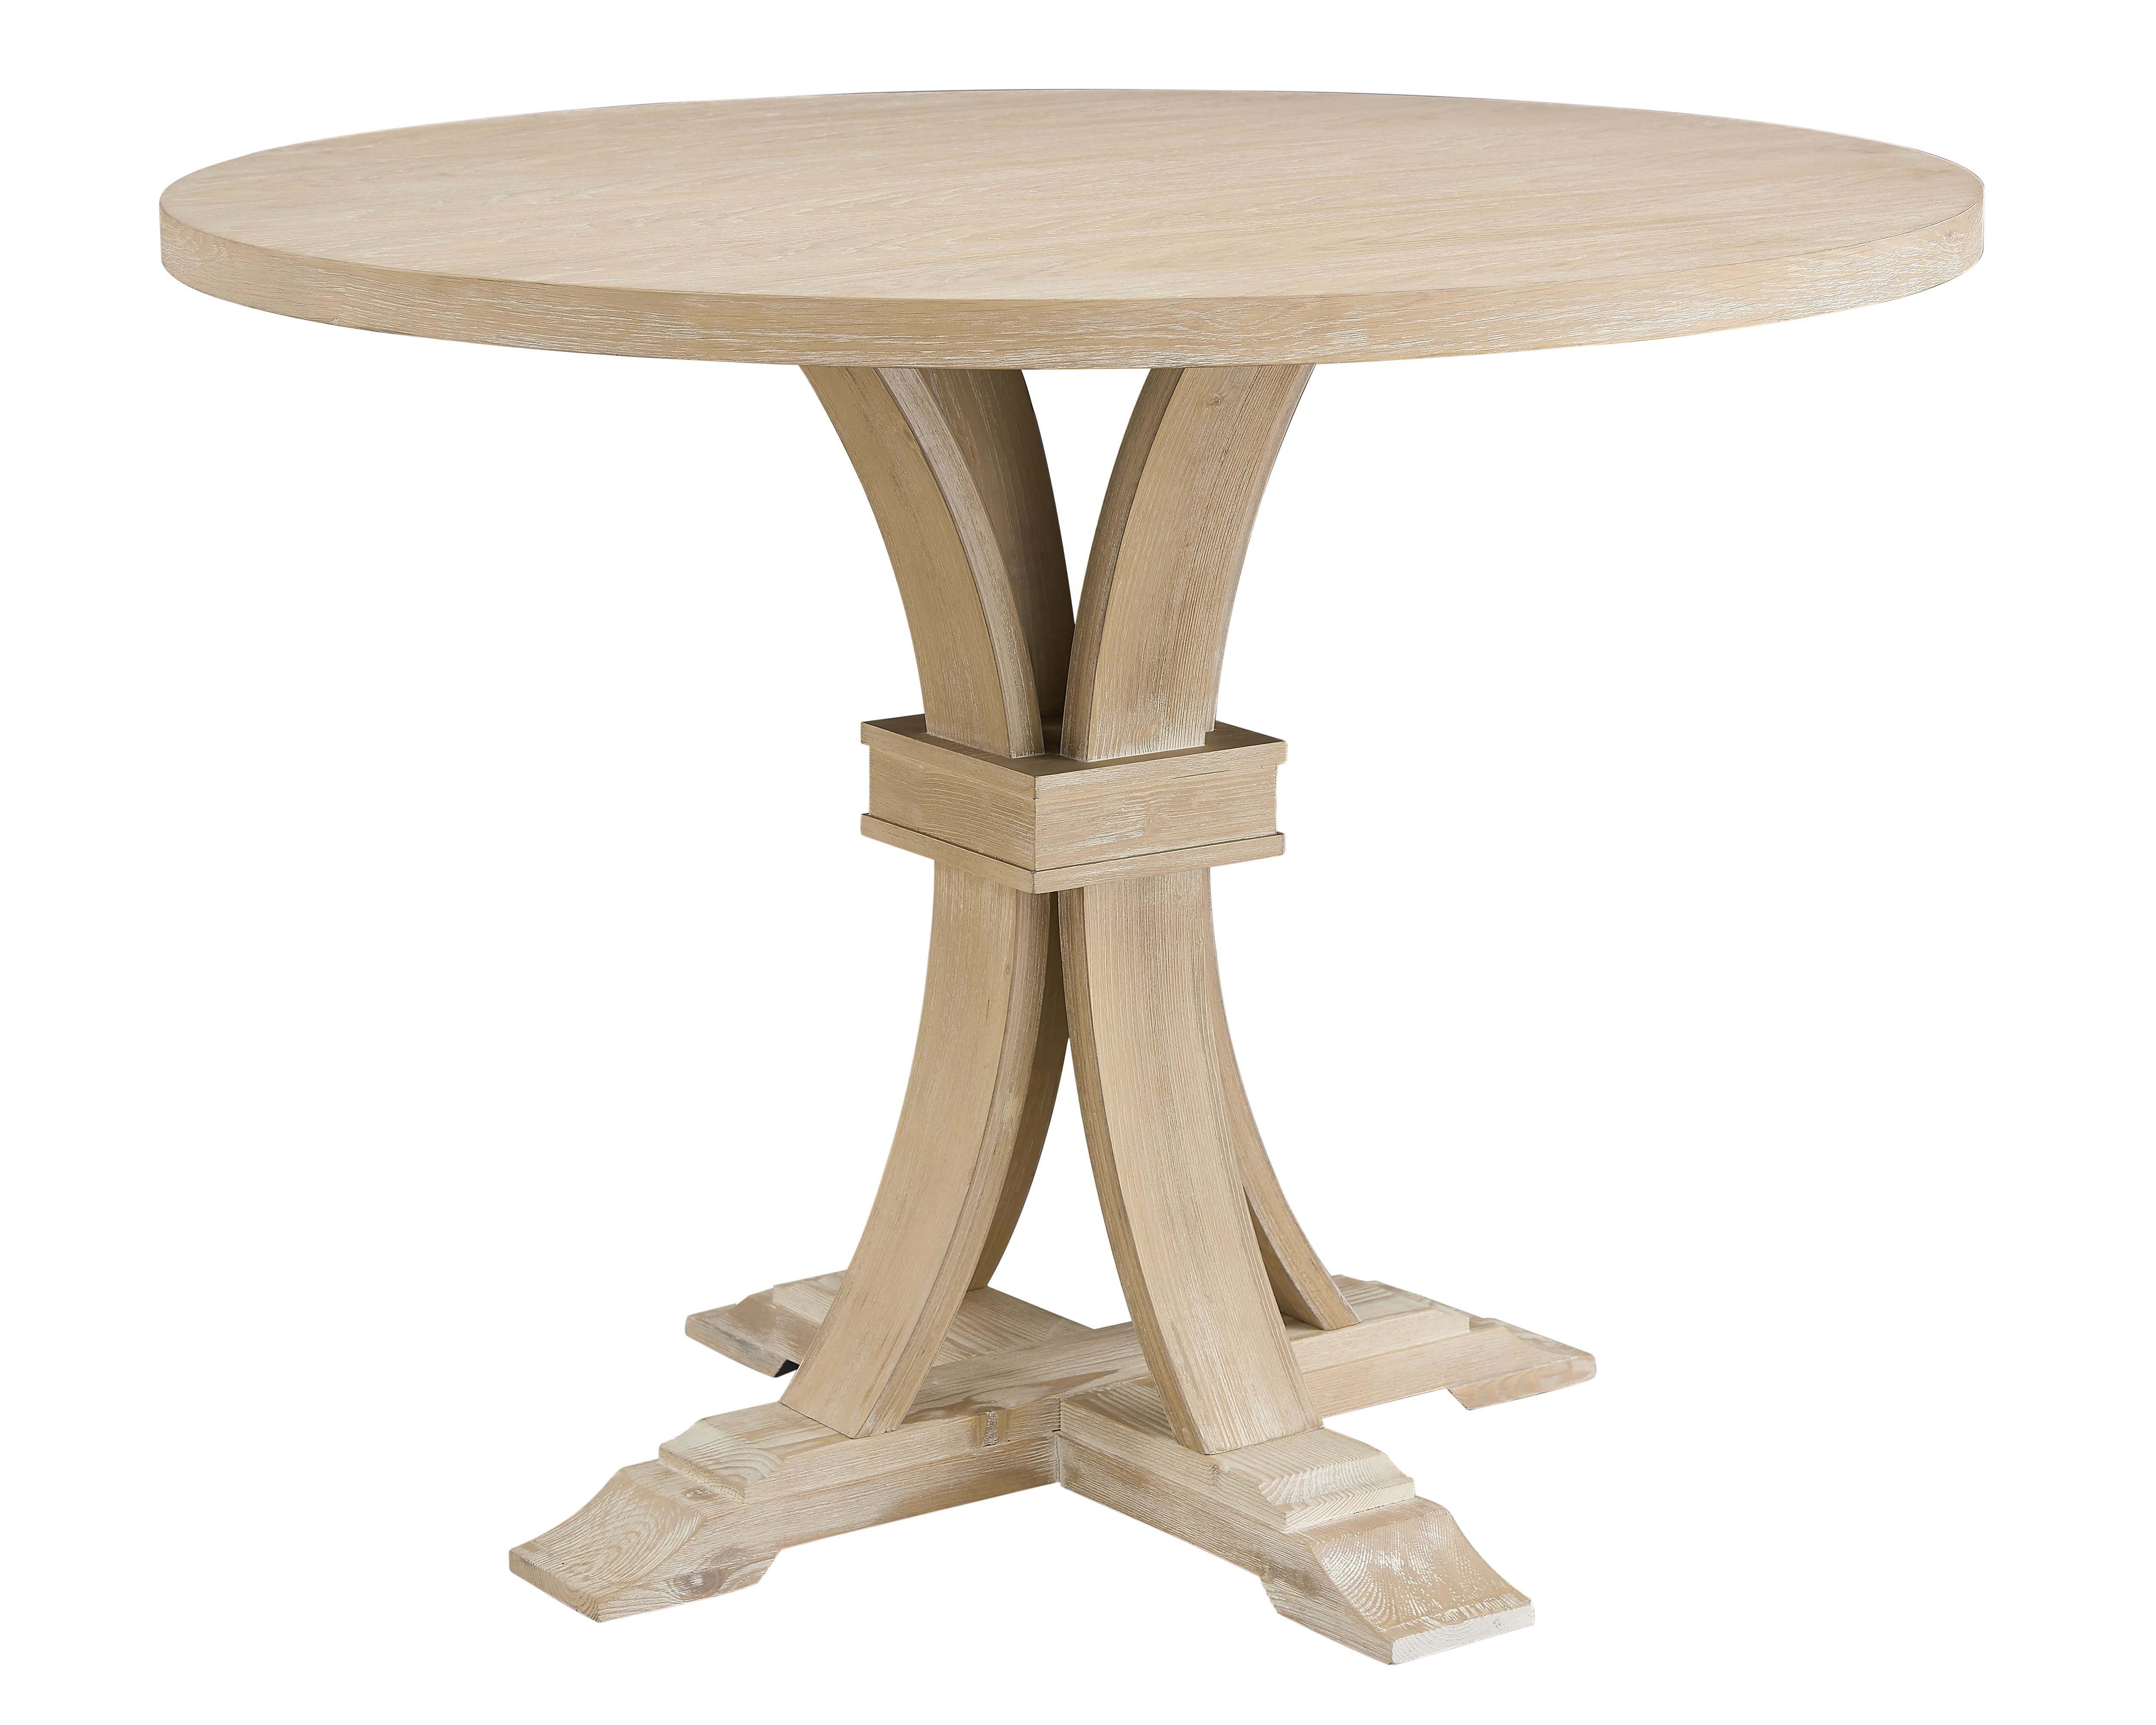 Roundhill Furniture Siena Whitewashed Finished Round Pedestal Counter Height Dining Table